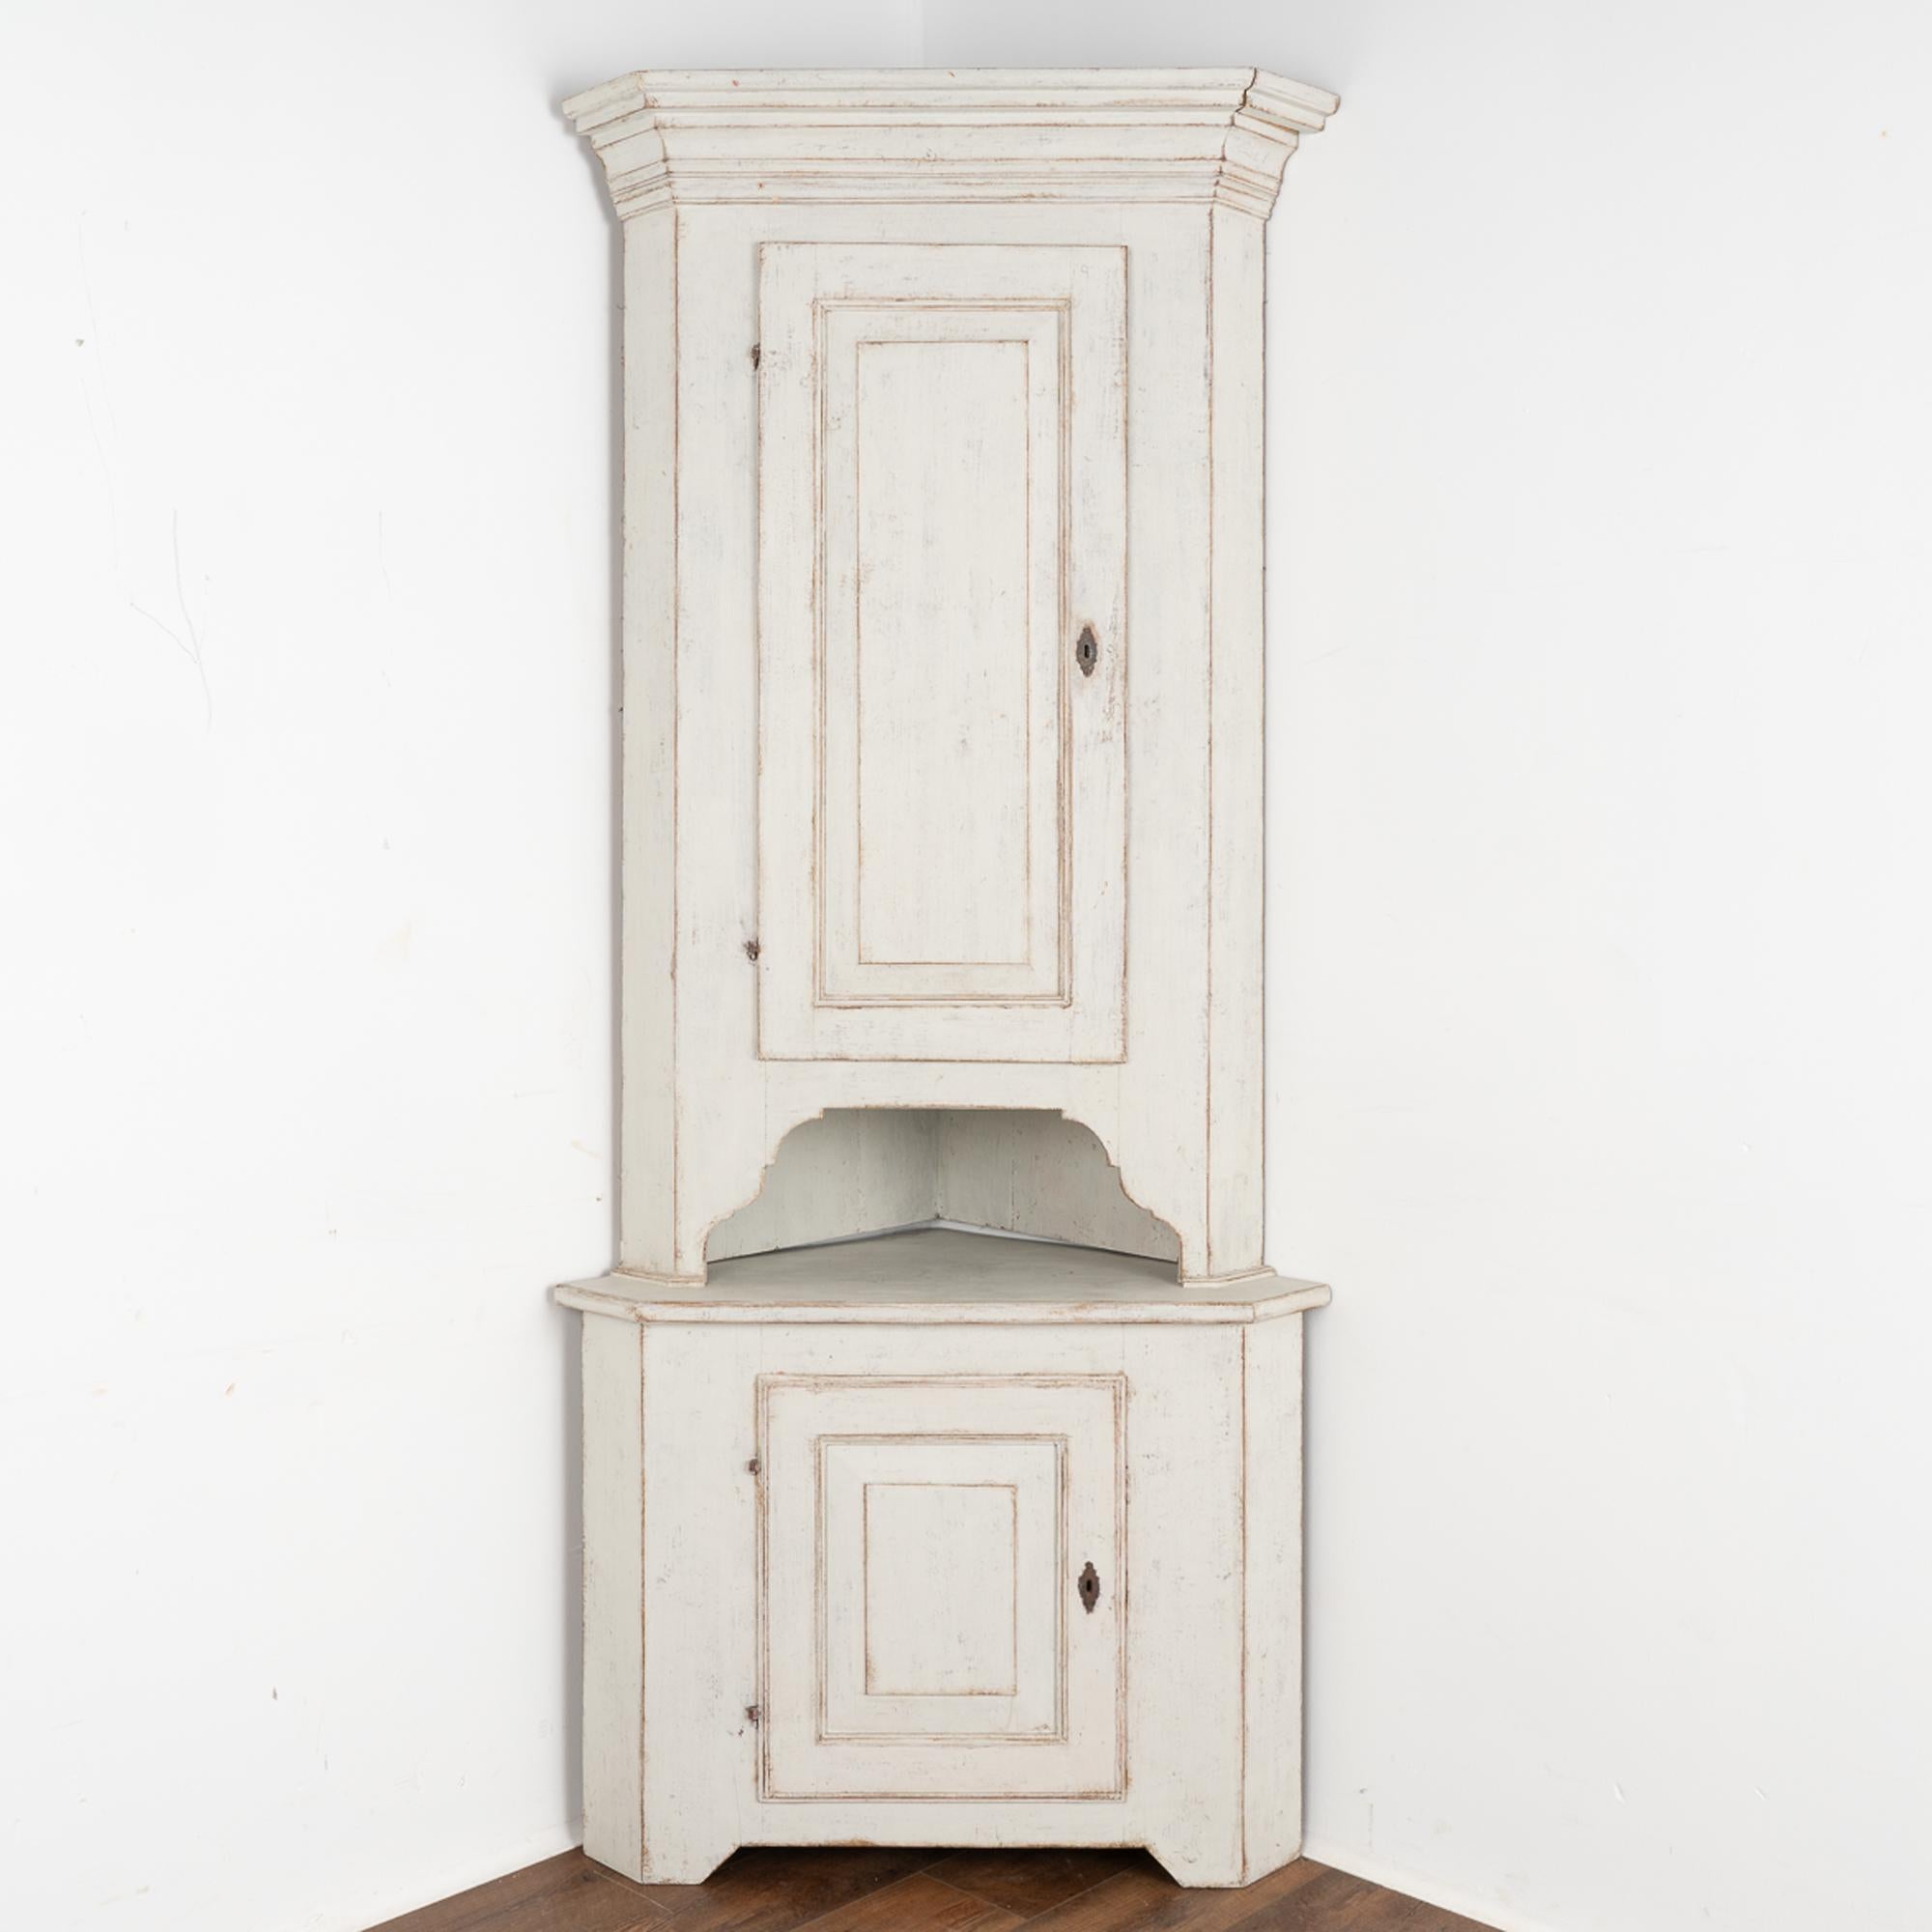 This statuesque pine corner cabinet has clean, straight lines and was crafted in the early 1800's. It is built in two sections and stands over 7' tall. 
Restored, strong and stable; later painted in layered shades of white and light gray; it is